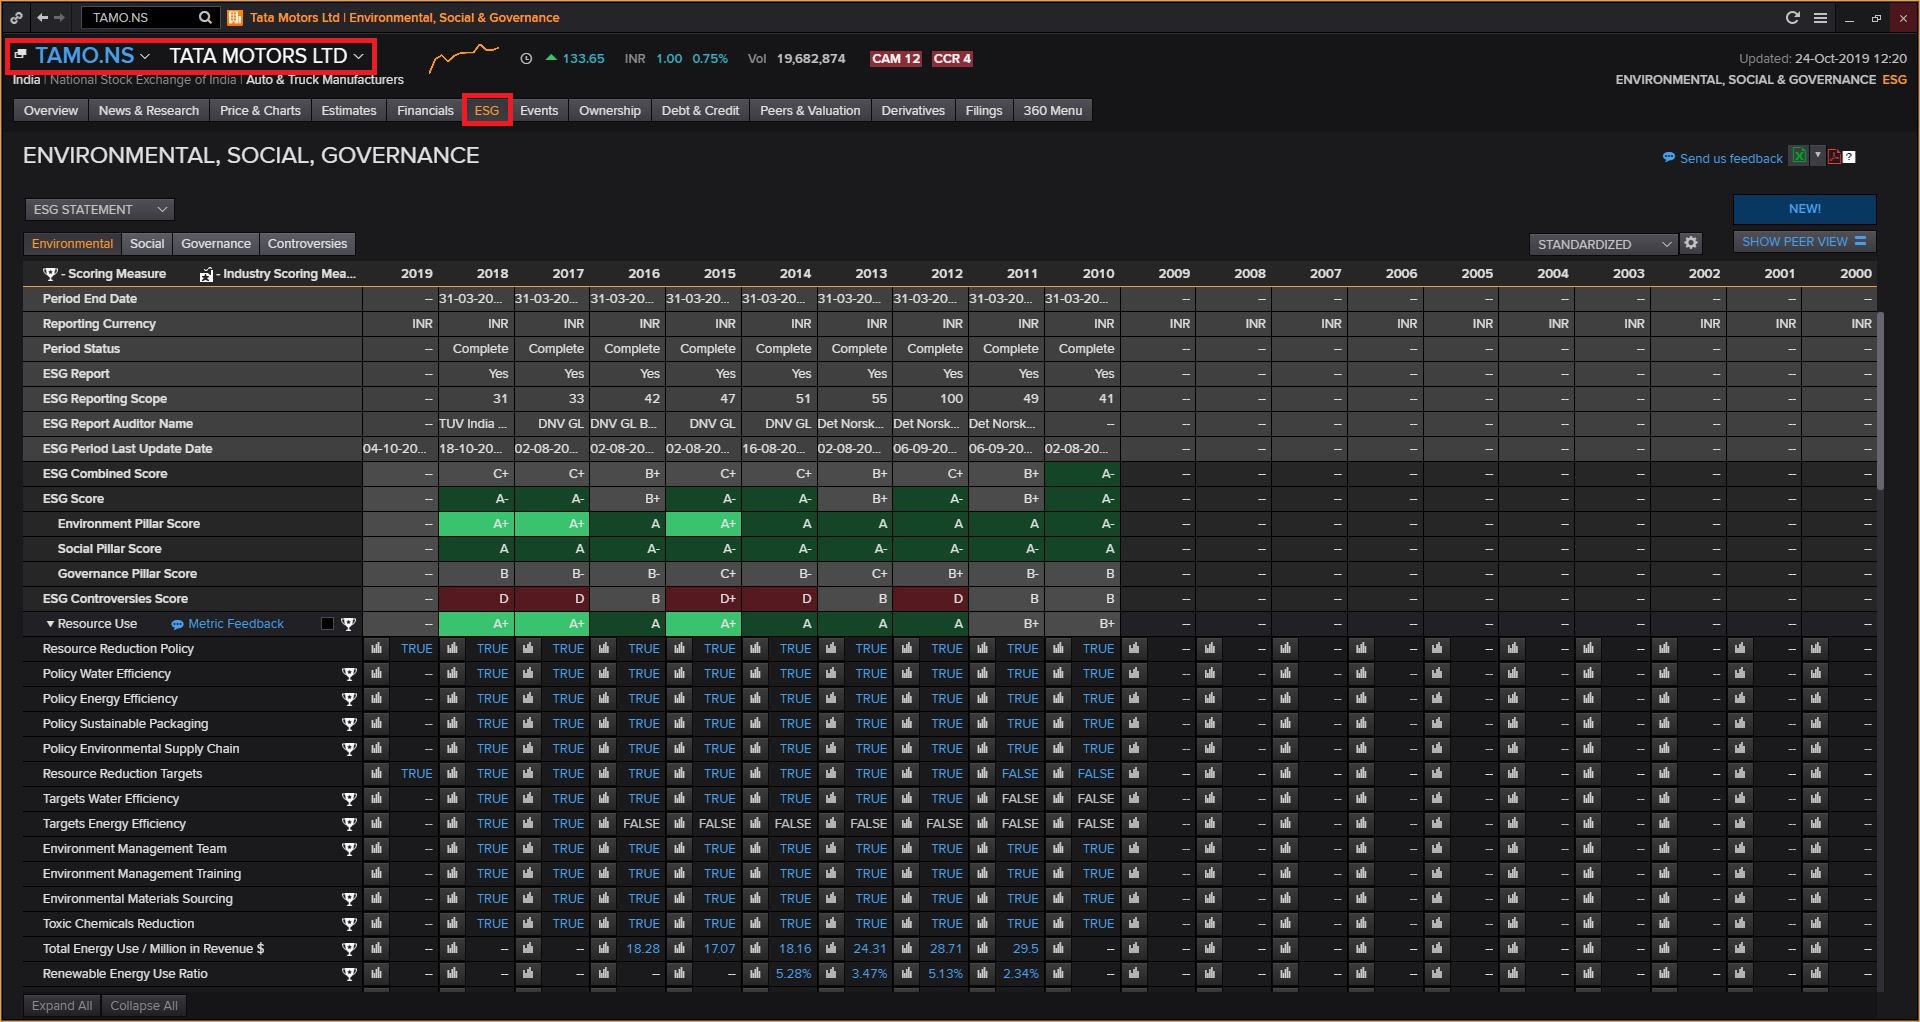 Login to Thomson Reuters Eikon (Available Only in Library) Then Search for a Company and Click on ESG